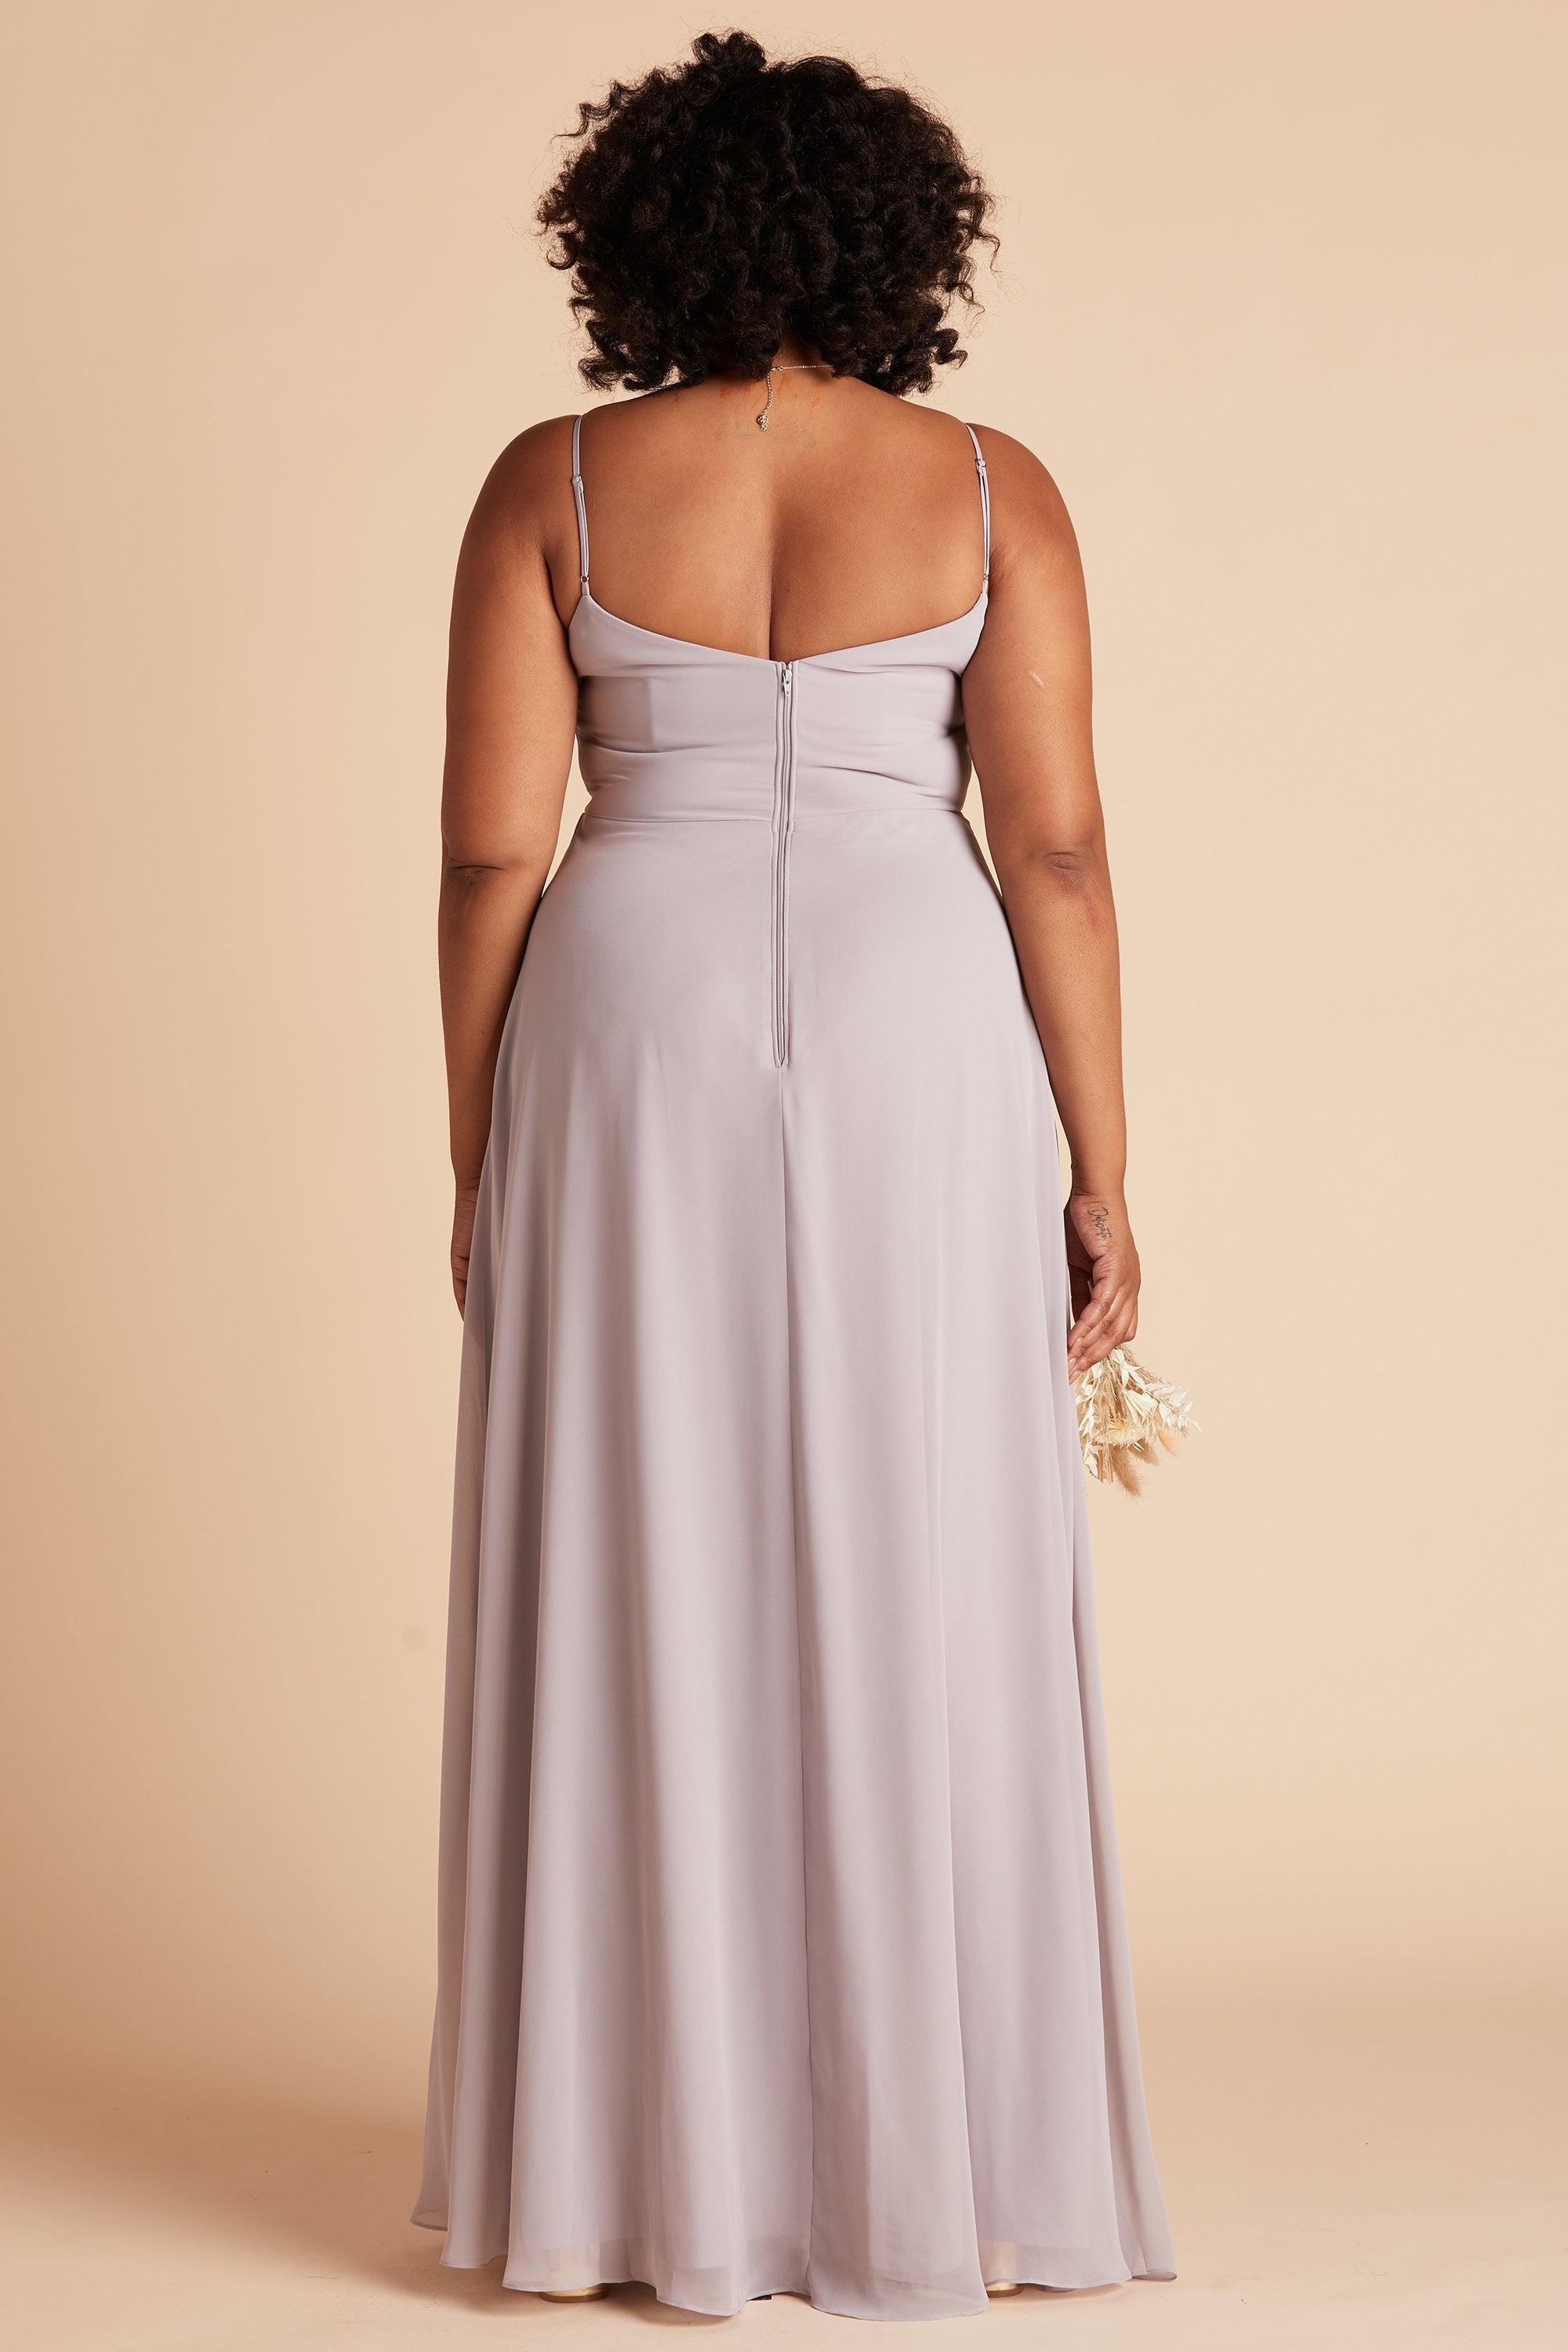 Devin convertible plus size bridesmaids dress in lilac purple chiffon by Birdy Grey, back view